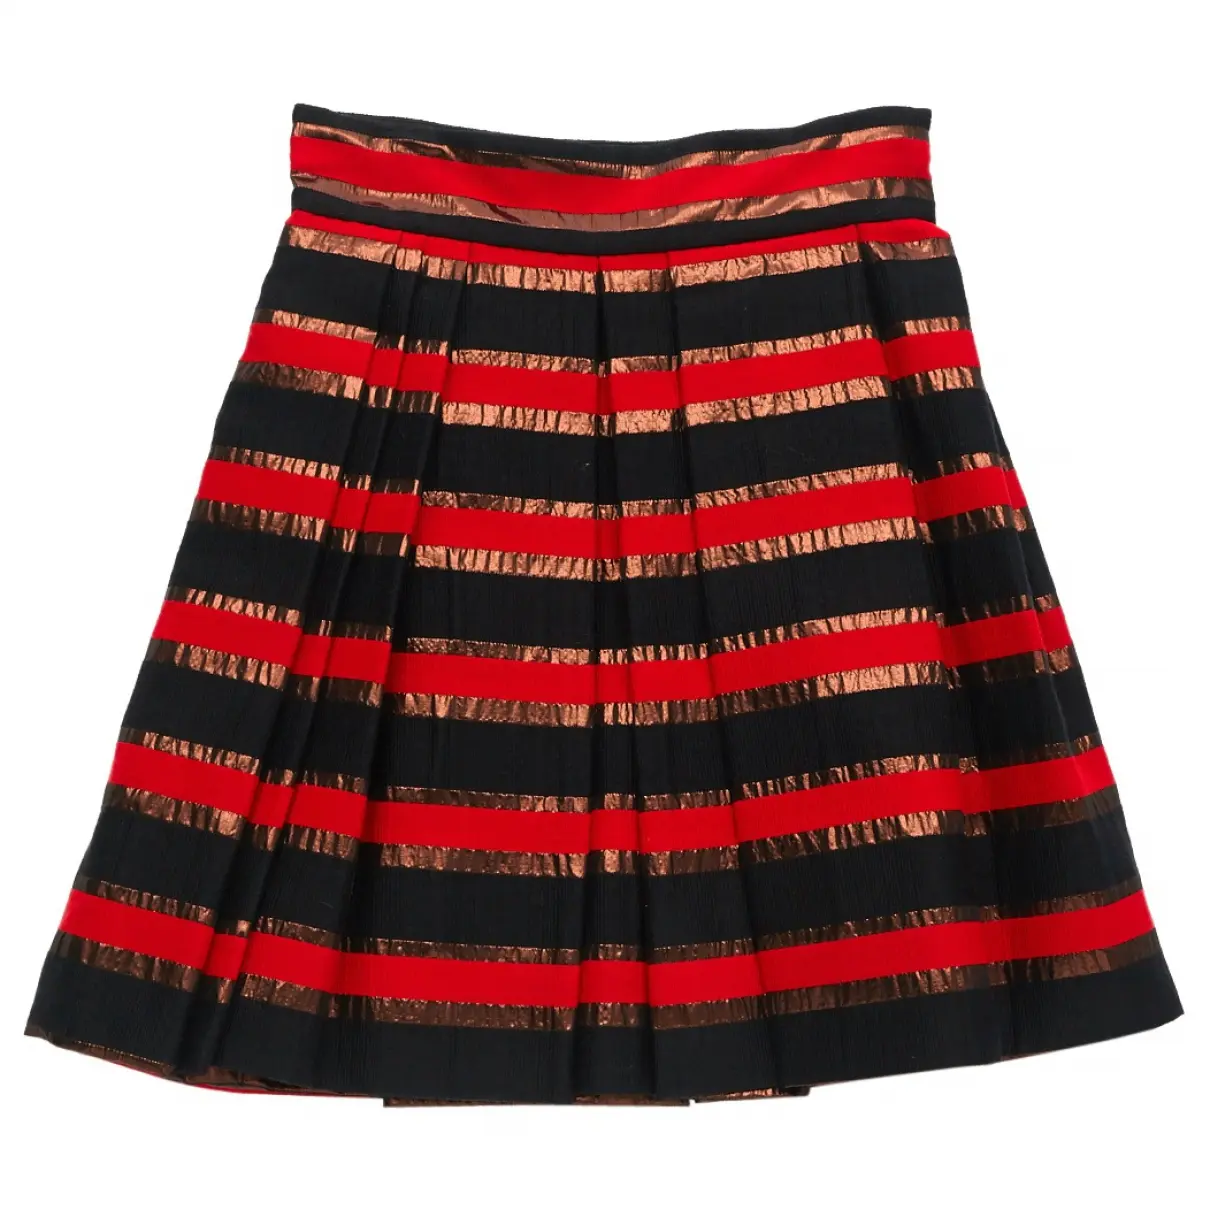 SKIRT Marc by Marc Jacobs